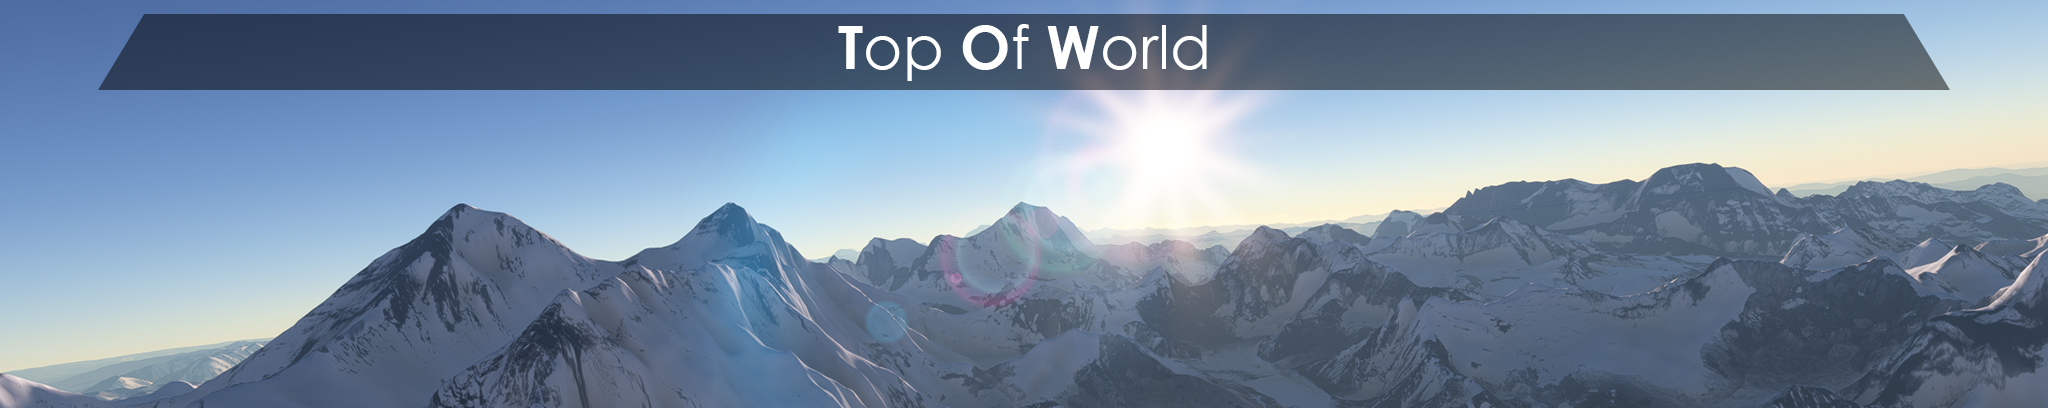 Top of the World